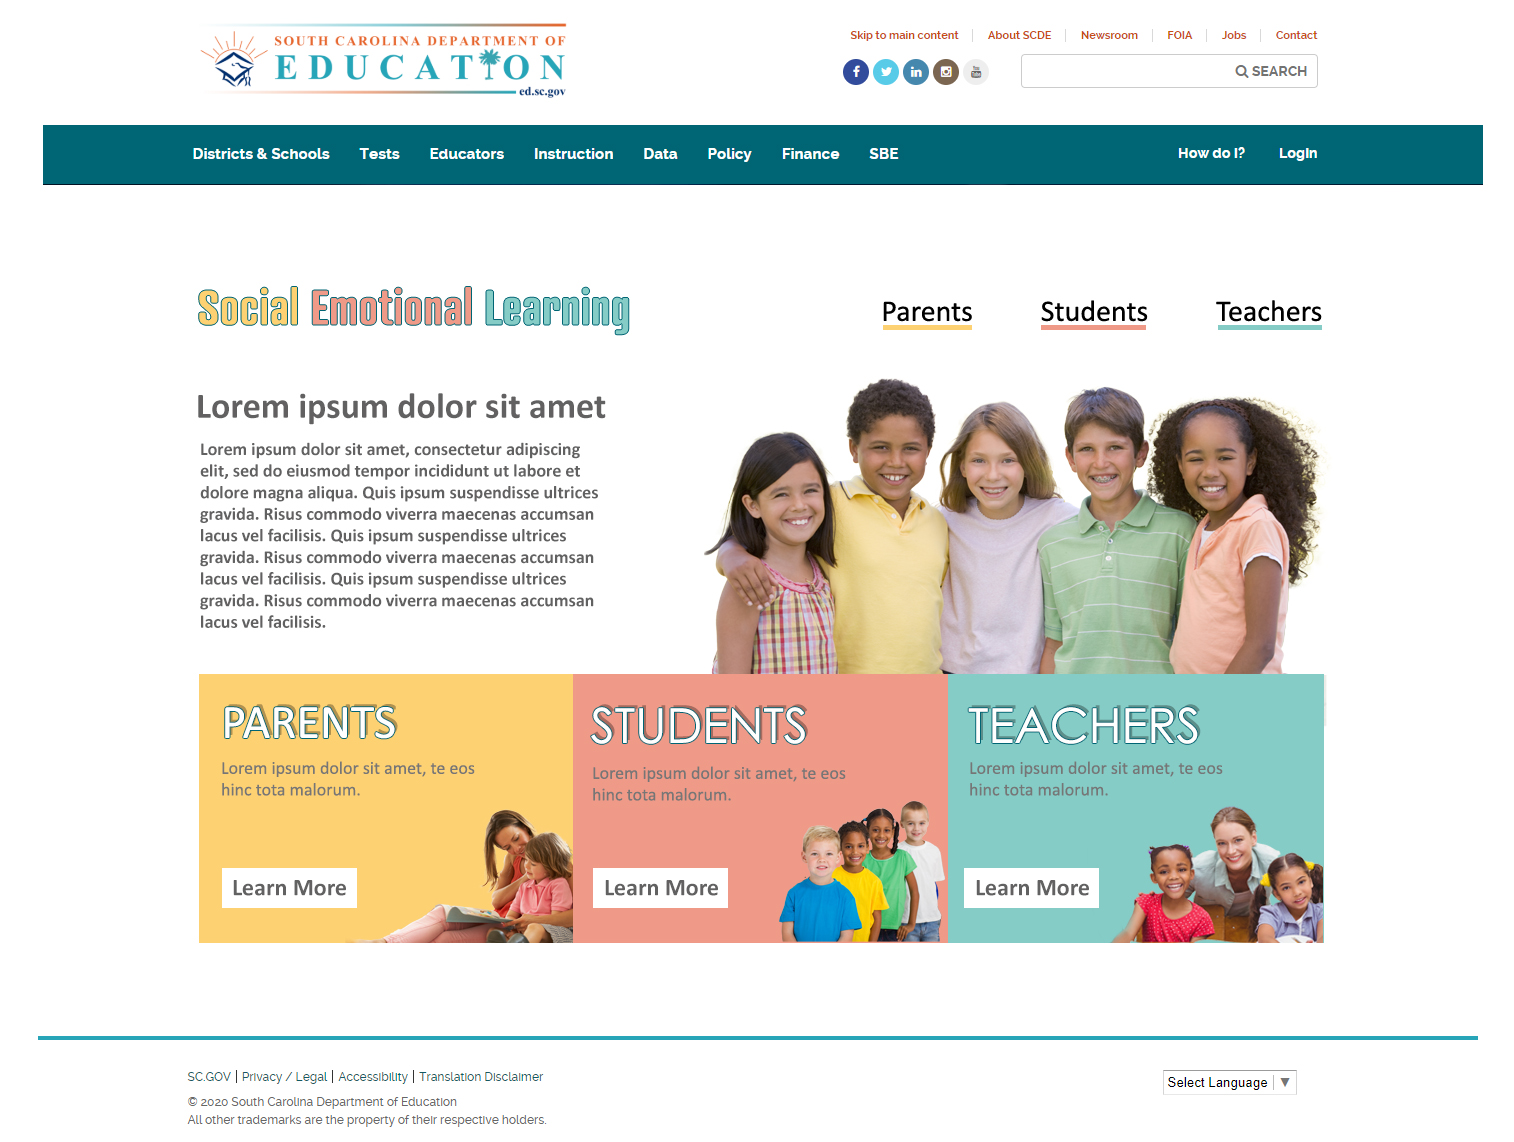 Image of Website created at South Carolina Department of Education titled Social Emotional Learning